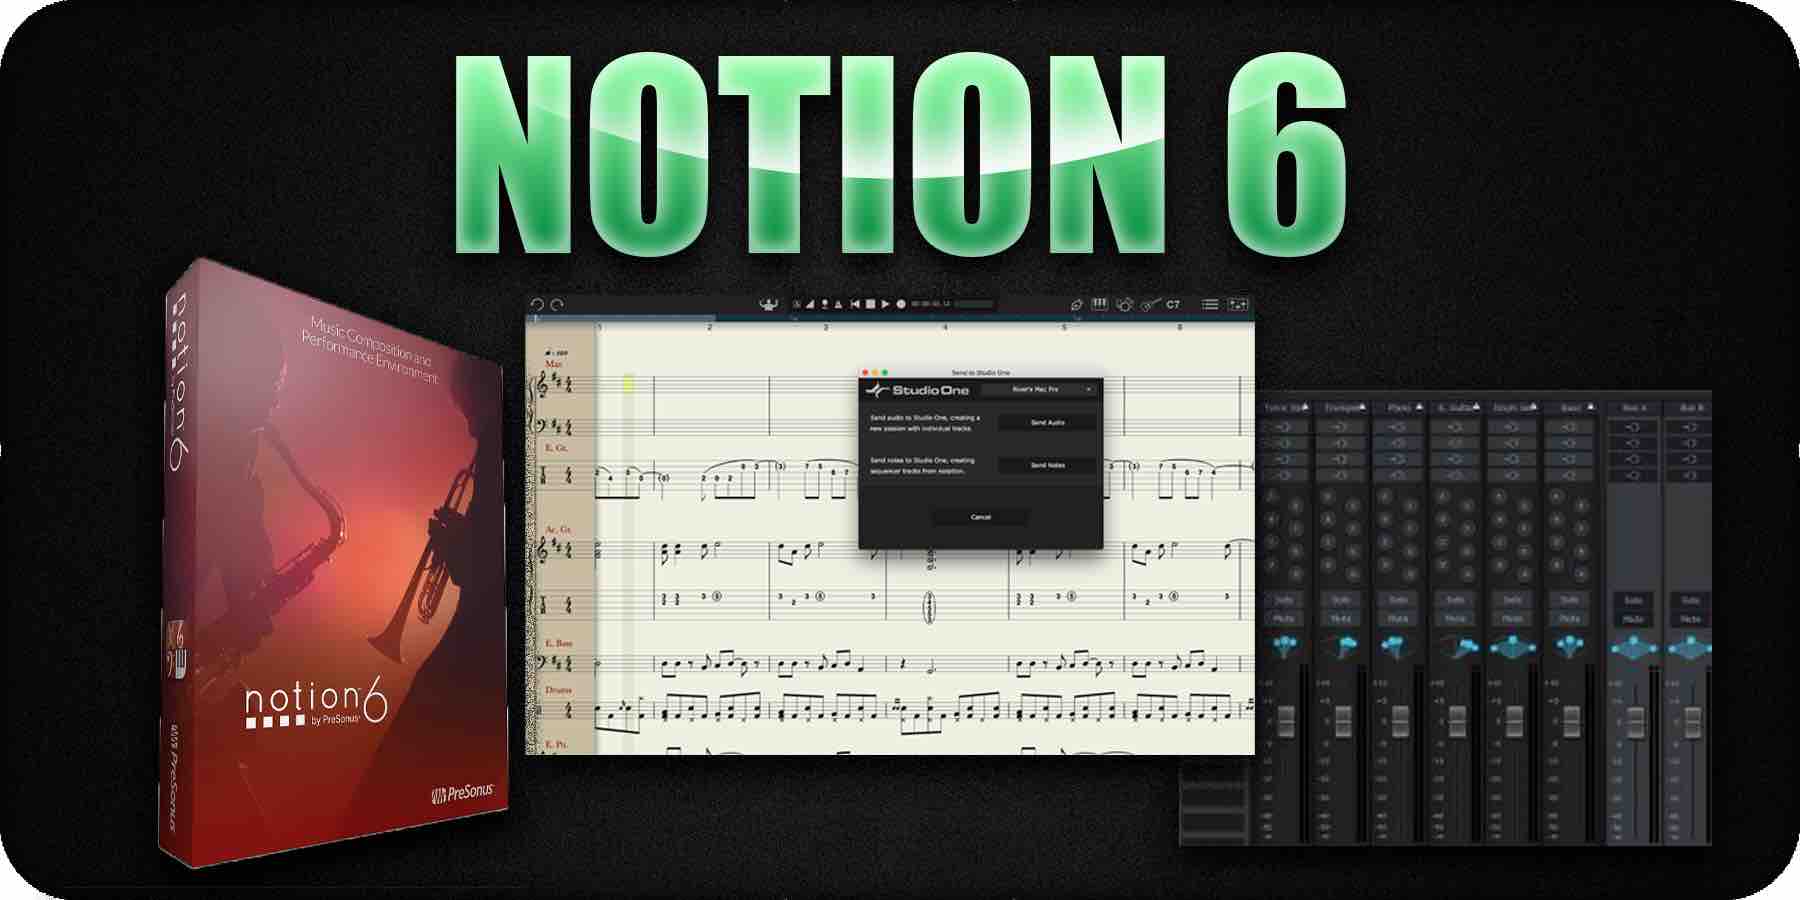 Notion 6 Music Notation Software